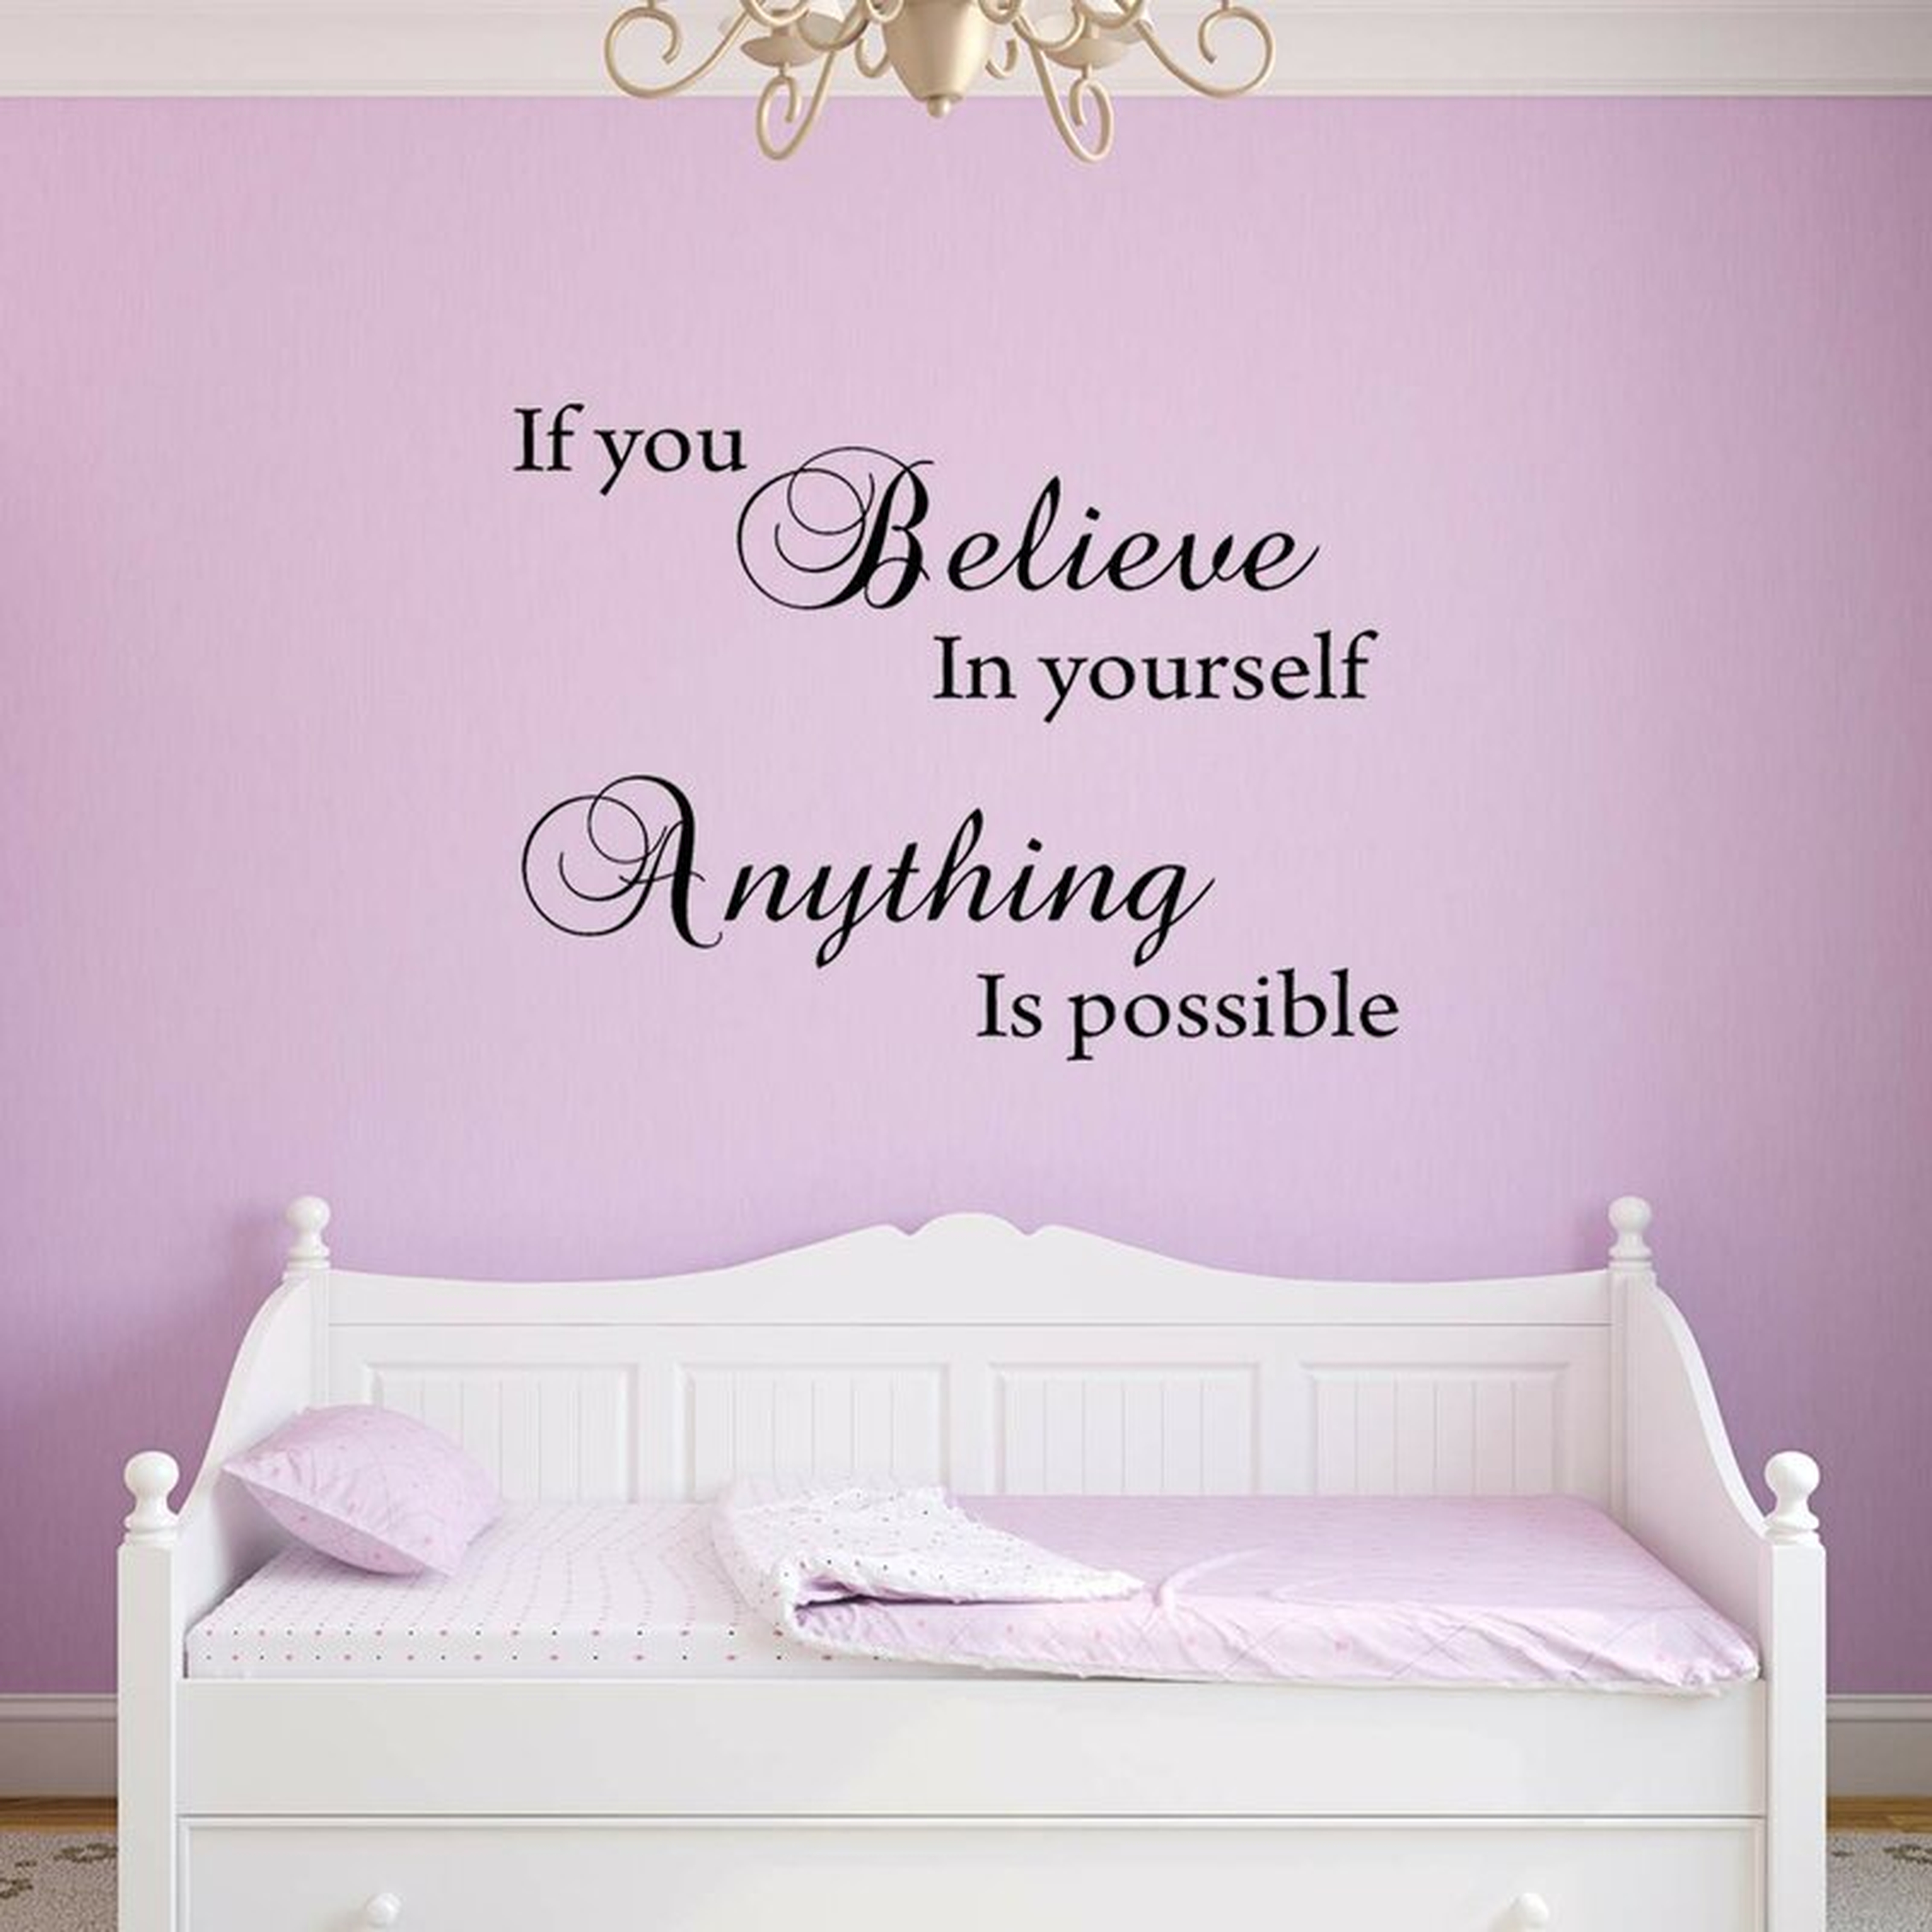 If You Believe in Yourself Anything Is Possible Inspiring Quotes Wall Decal - Wayfair